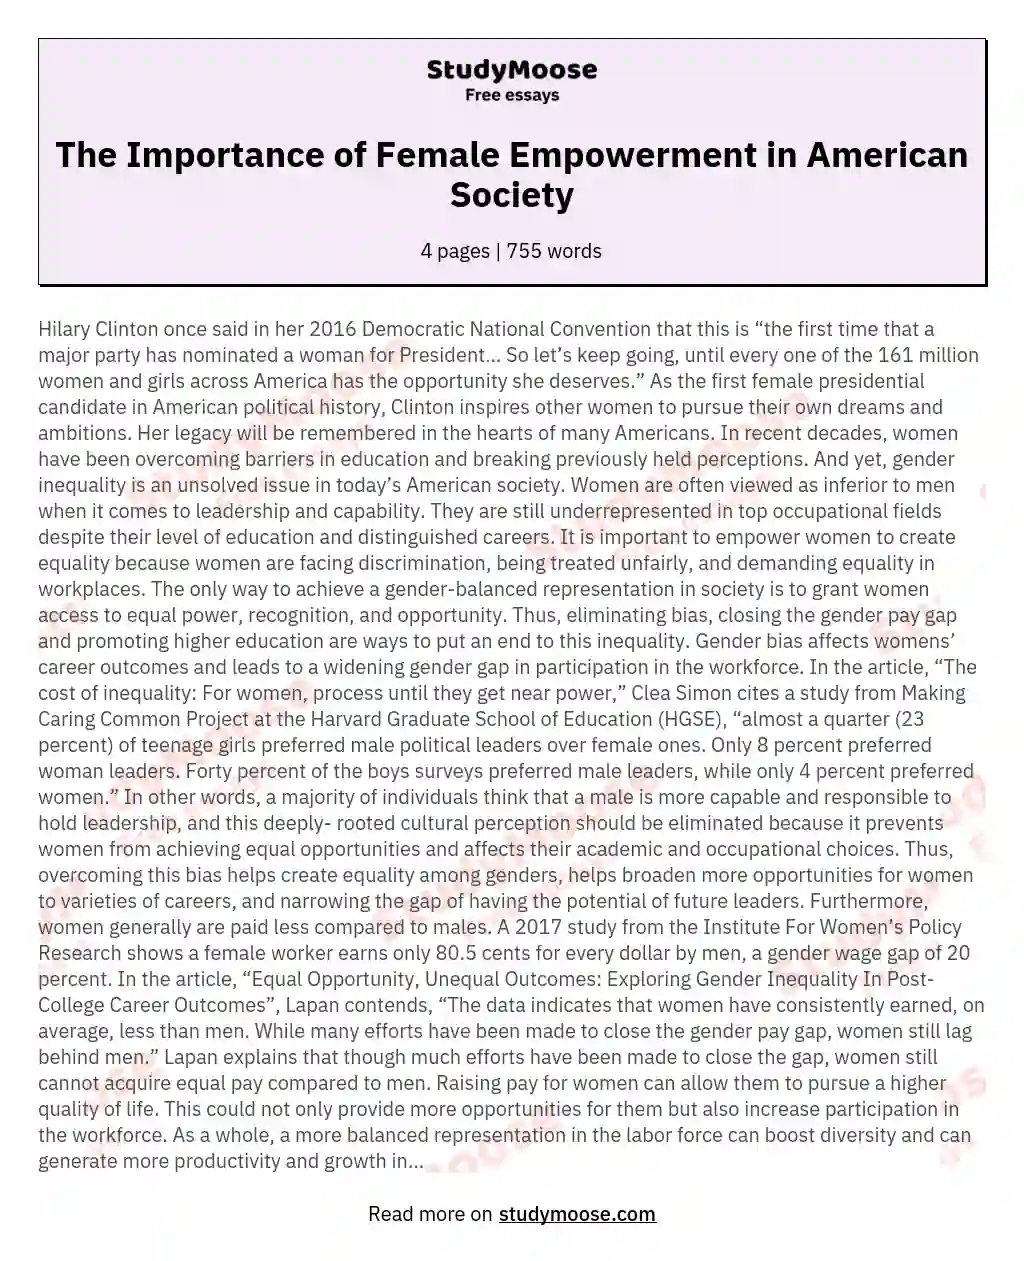 The Importance of Female Empowerment in American Society essay